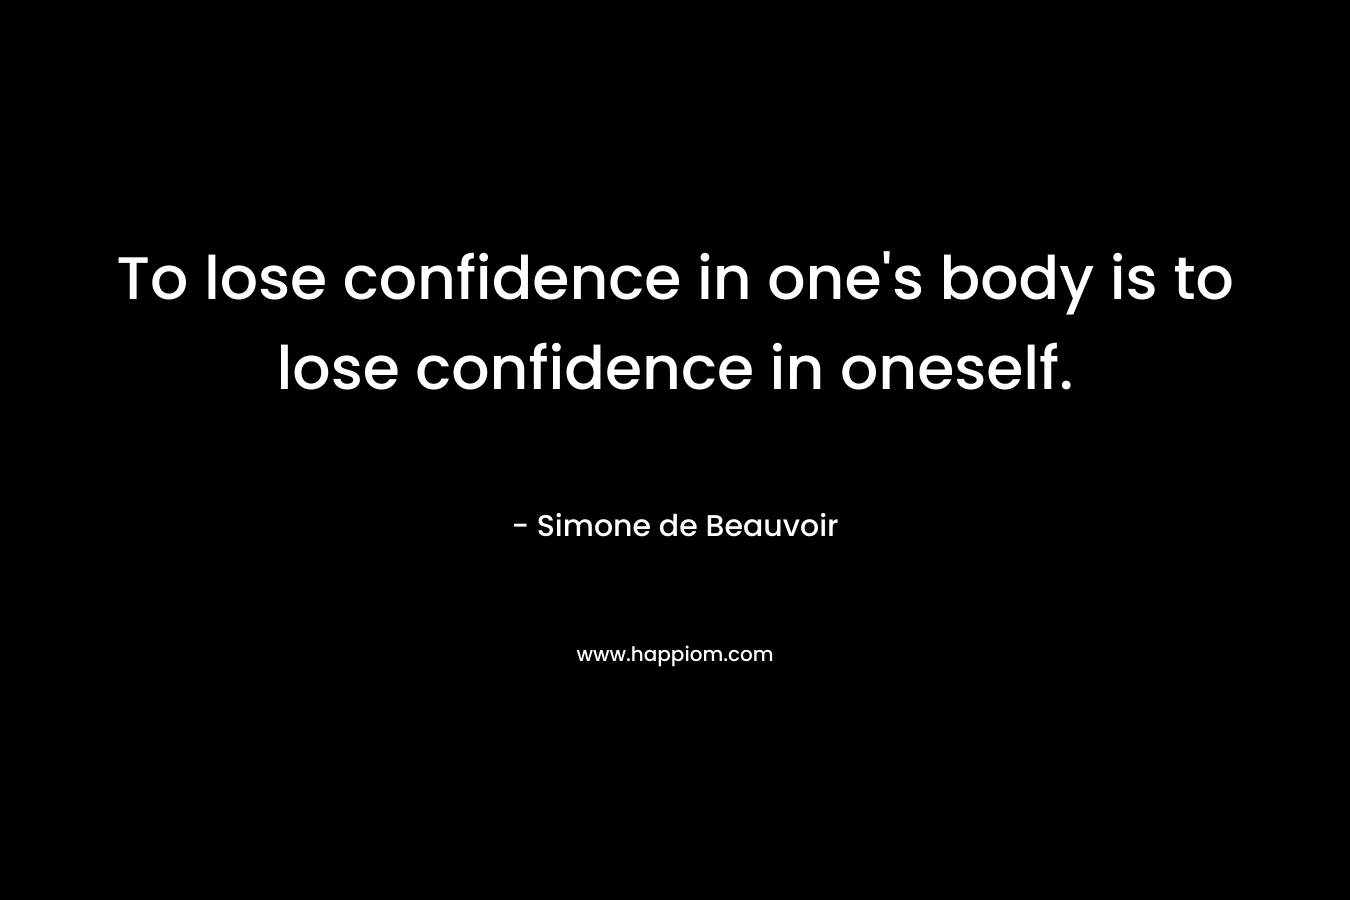 To lose confidence in one's body is to lose confidence in oneself.